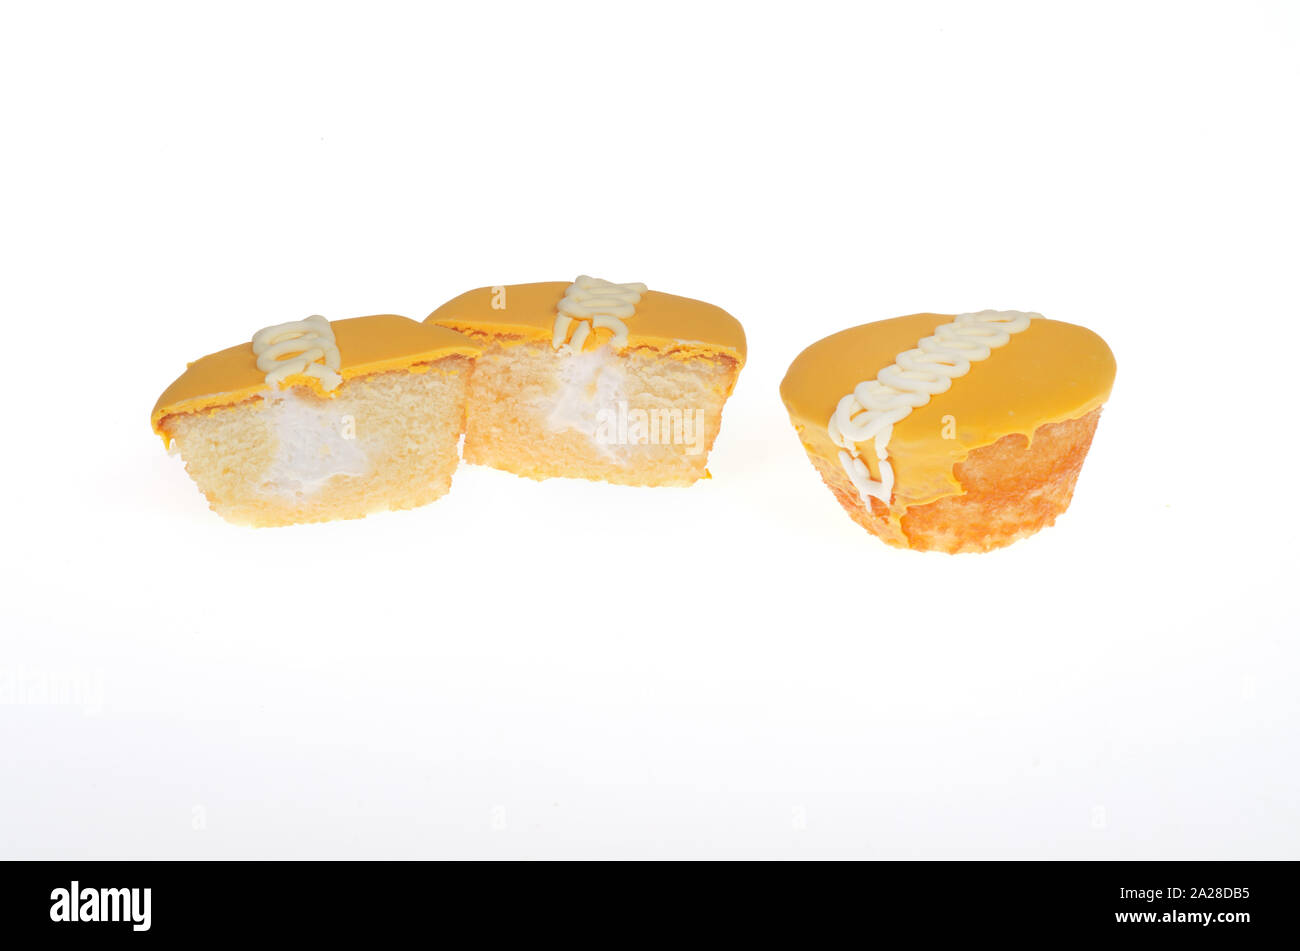 Hostess Frosted Orange Flavor Creme Filled CupCakes, 1 whole and 1 cut in half Stock Photo